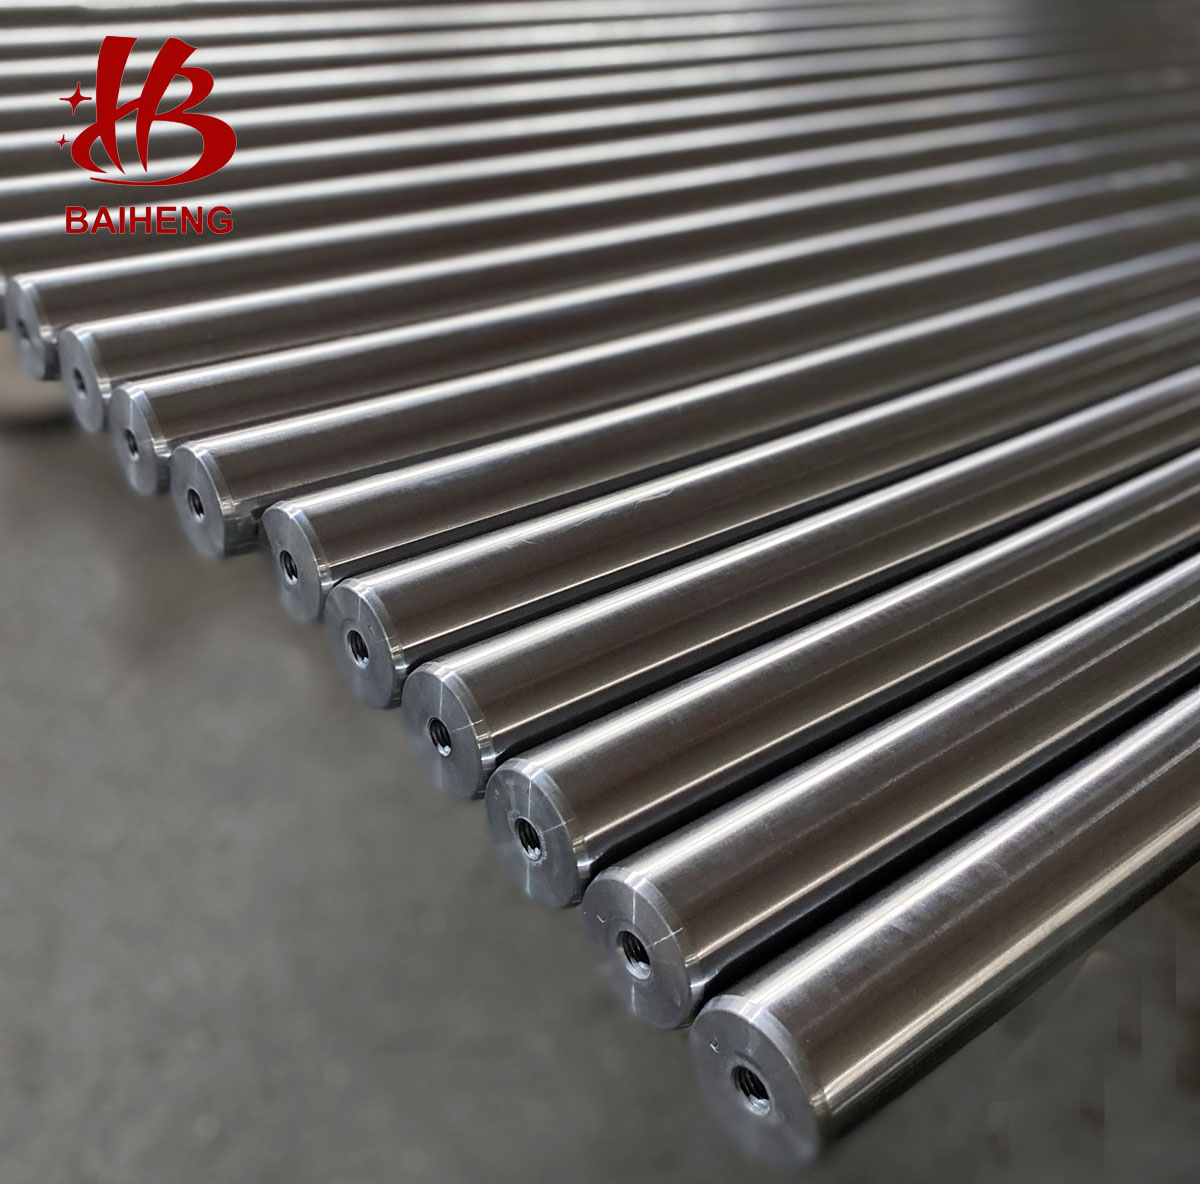 1045 material CK45 chrome plated rods with machined holes3